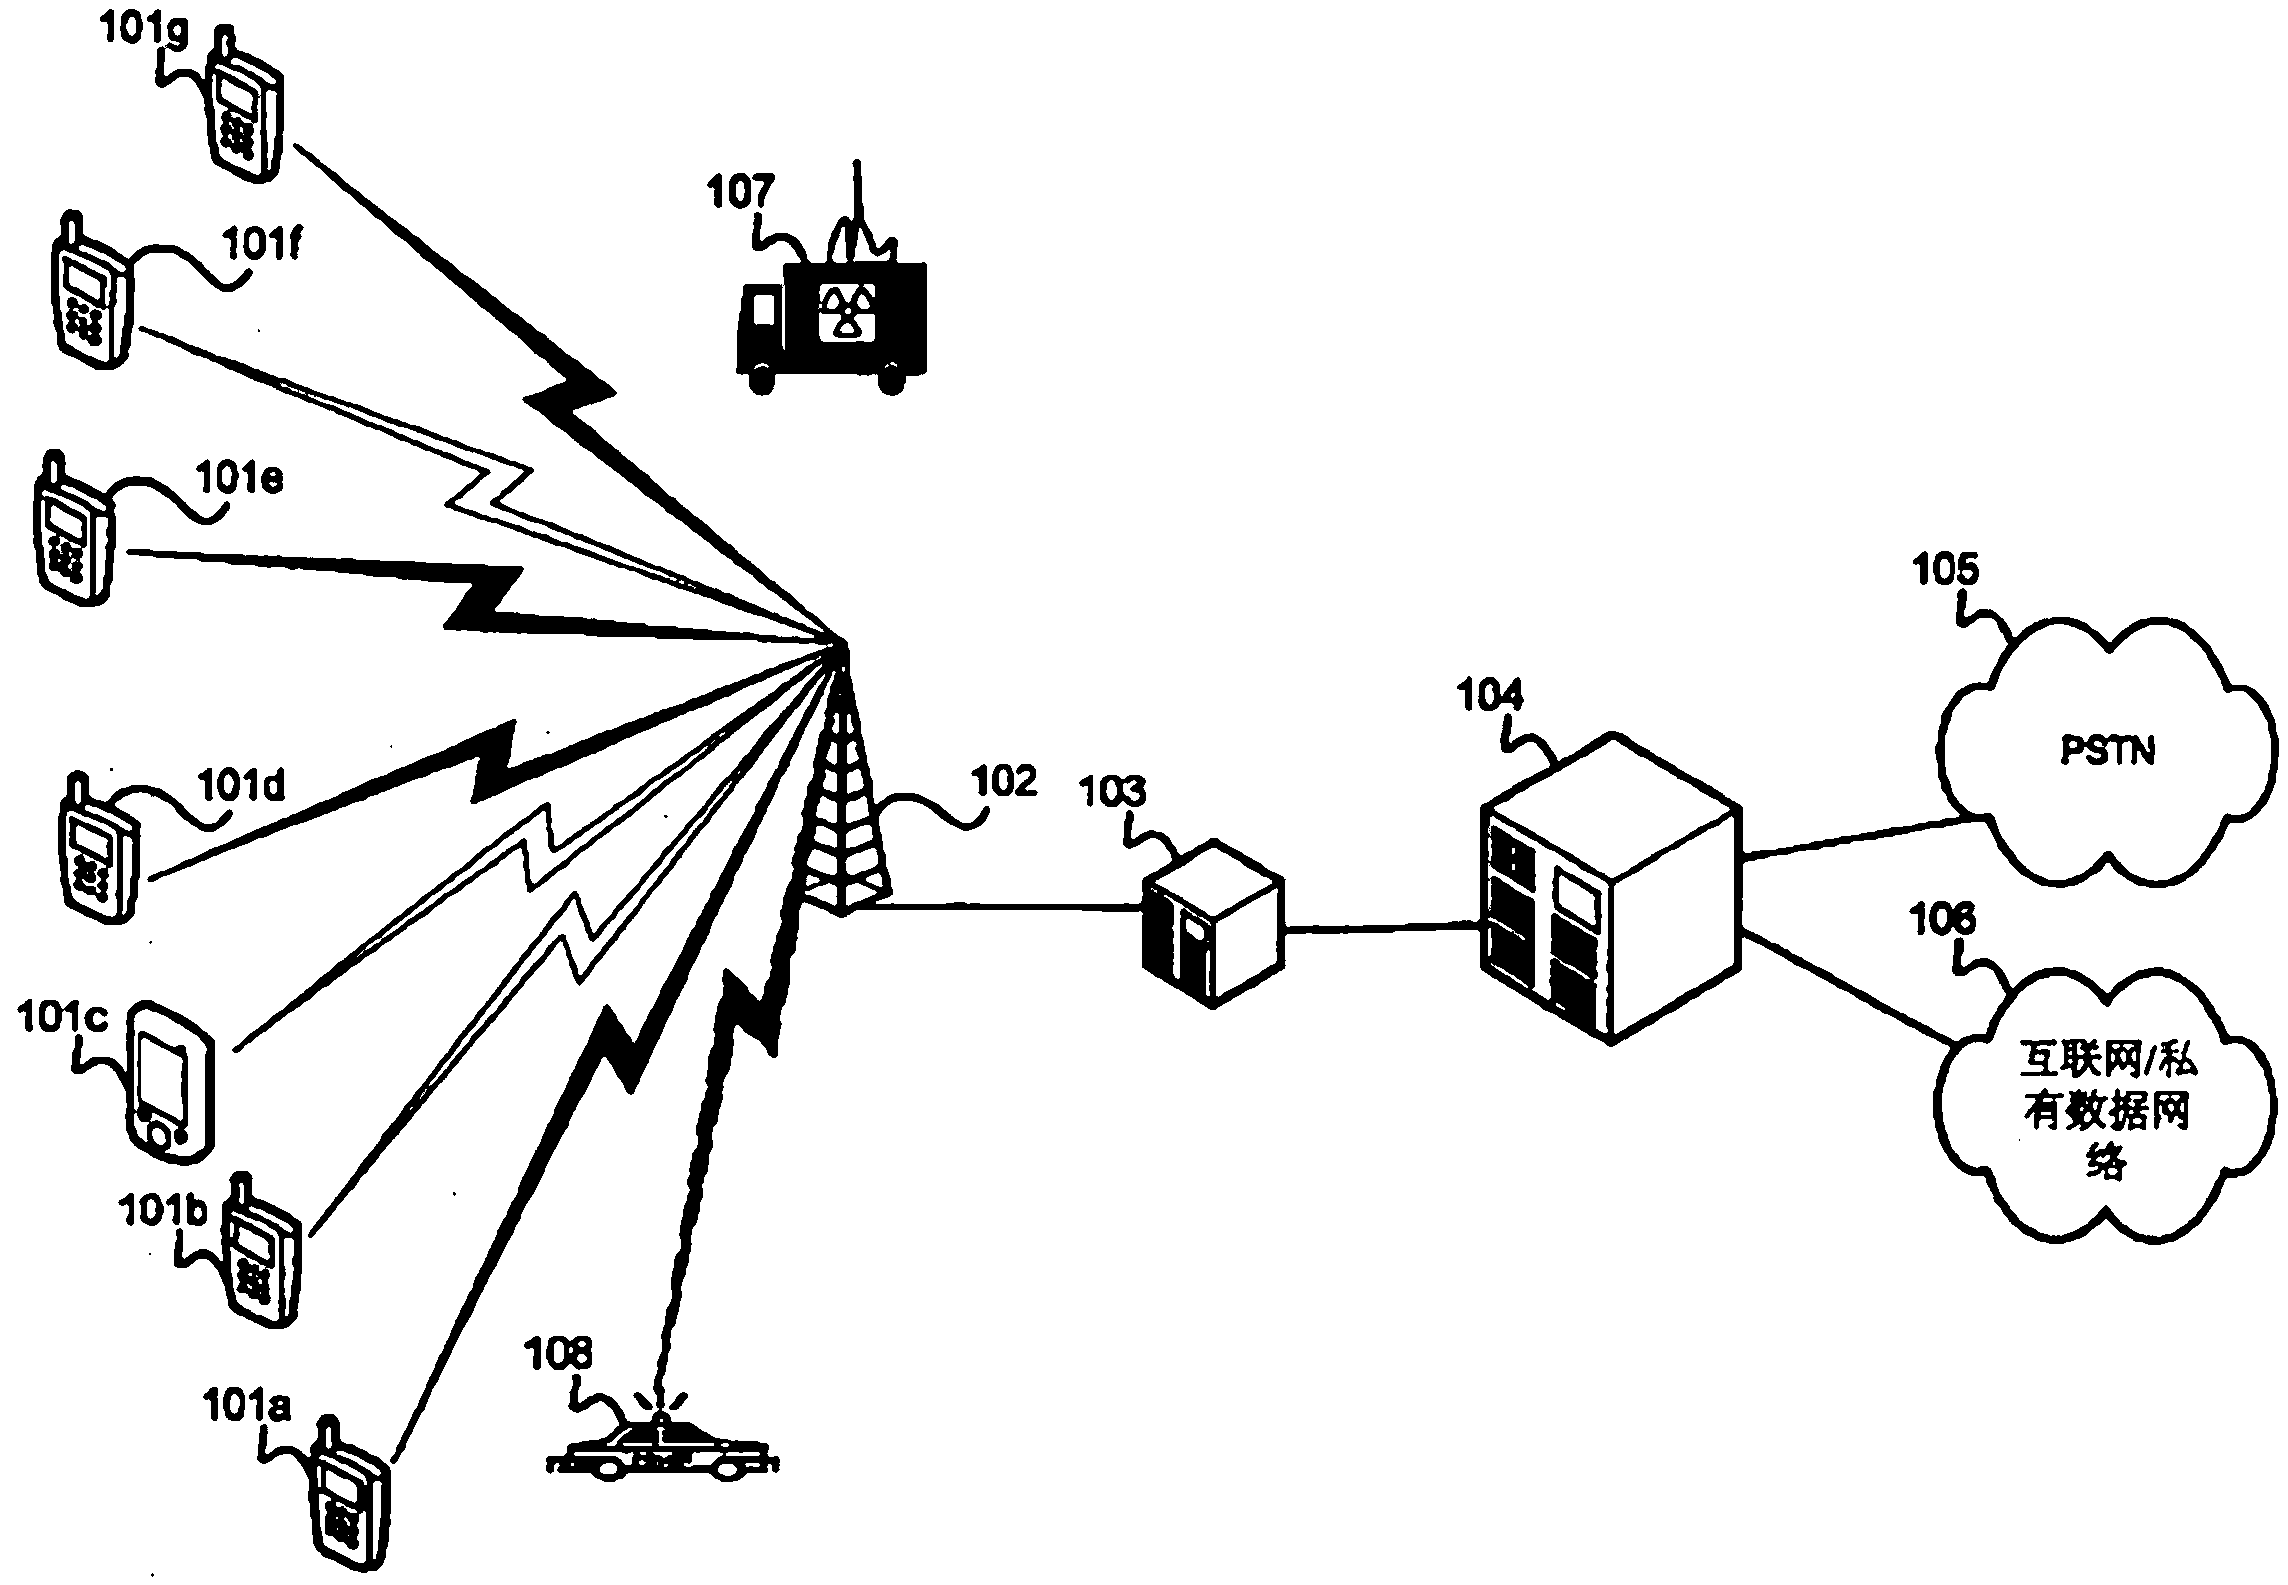 Methods and systems for dynamic spectrum arbitrage